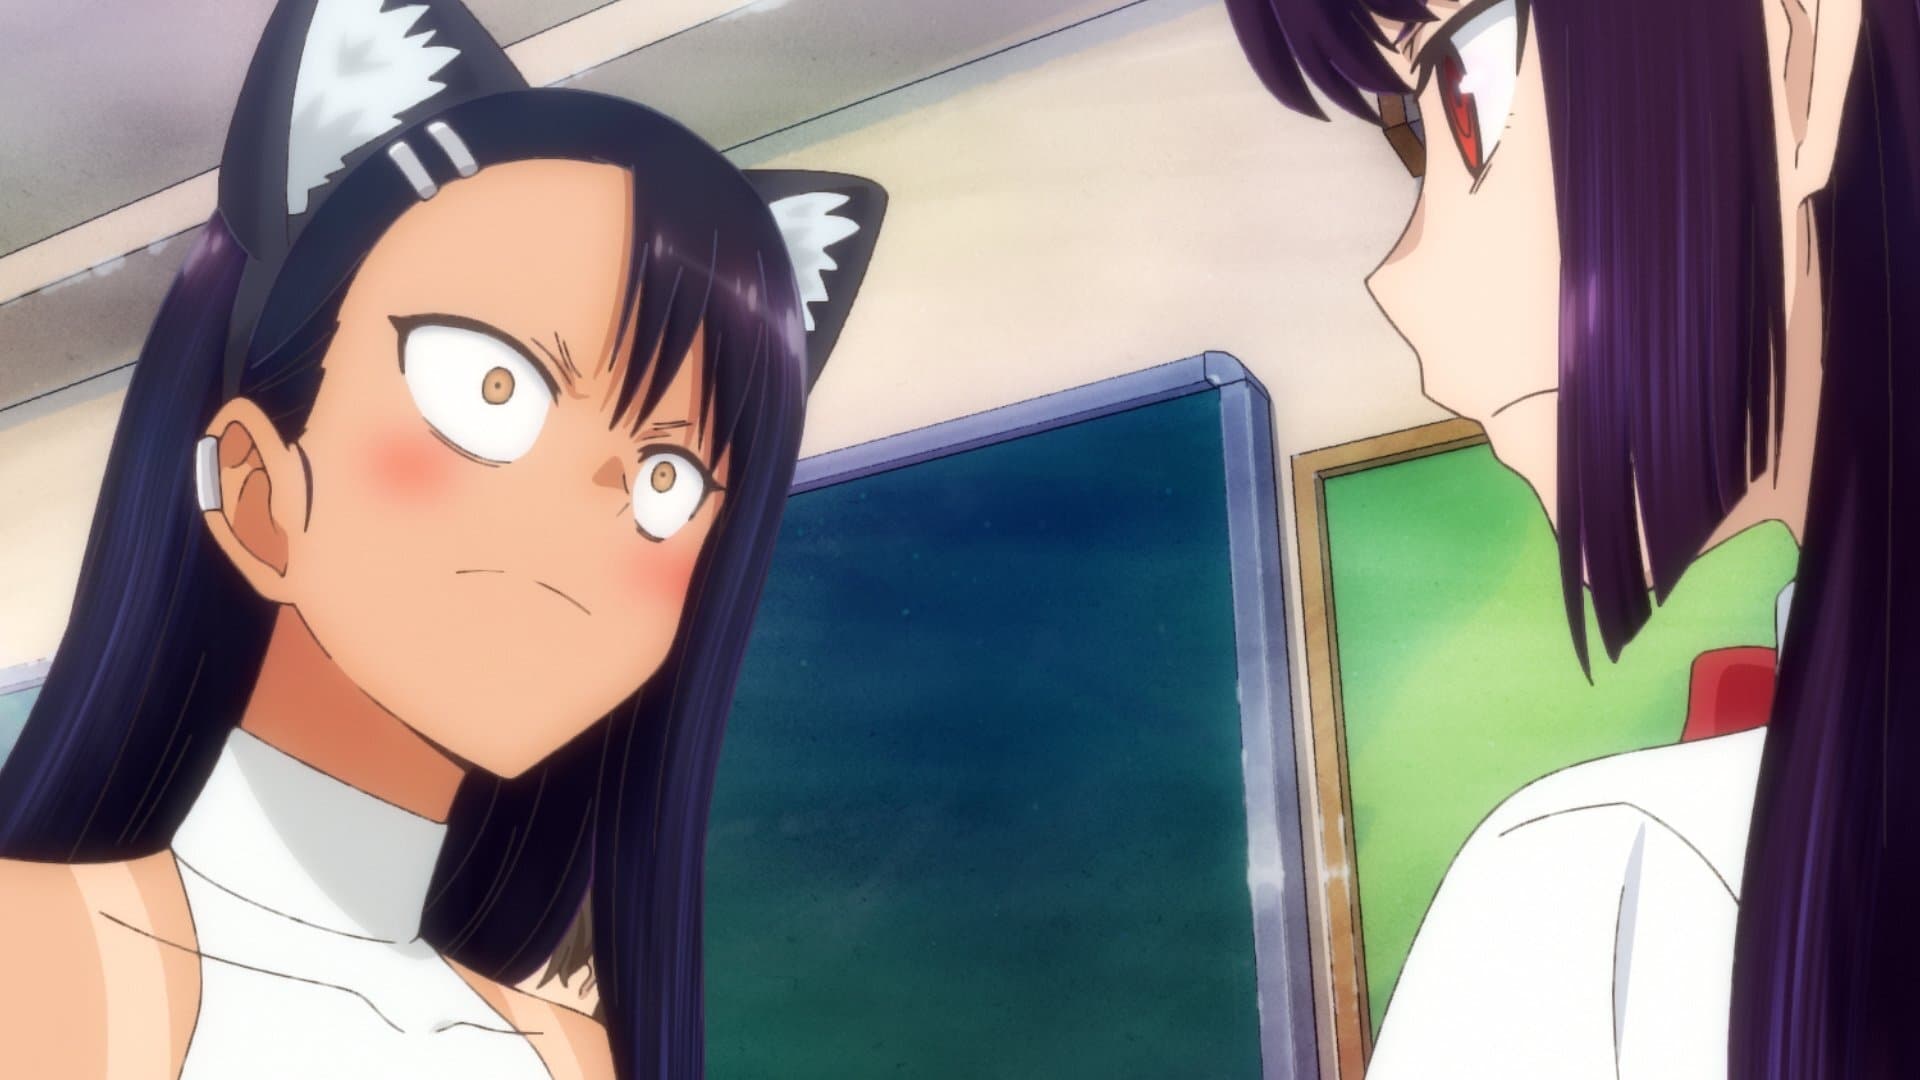 DON'T TOY WITH ME, MISS NAGATORO You're All Red, Senpai / Senpai, You Could  Be a Little More - Watch on Crunchyroll